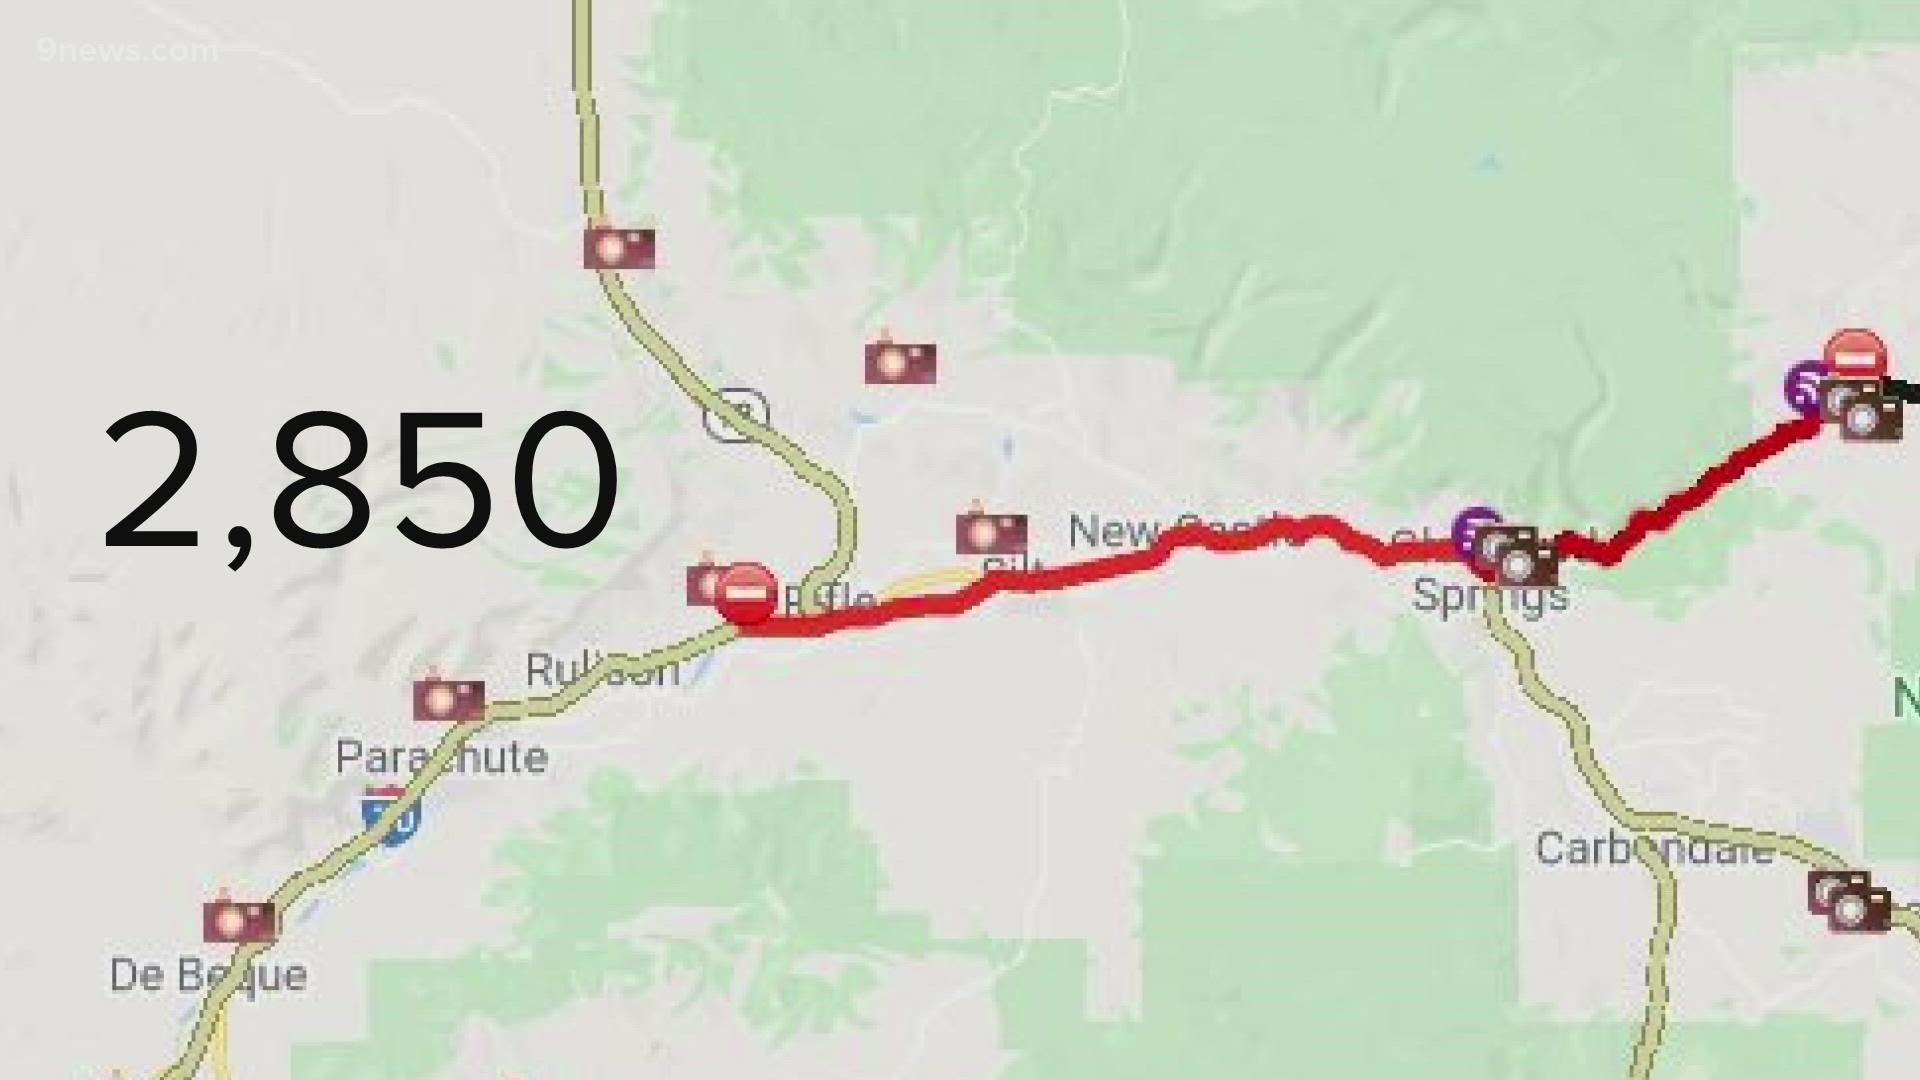 CDOT is just as frustrated as everyone else with the rain and mudslides that have shut down I-70 through Glenwood Canyon.